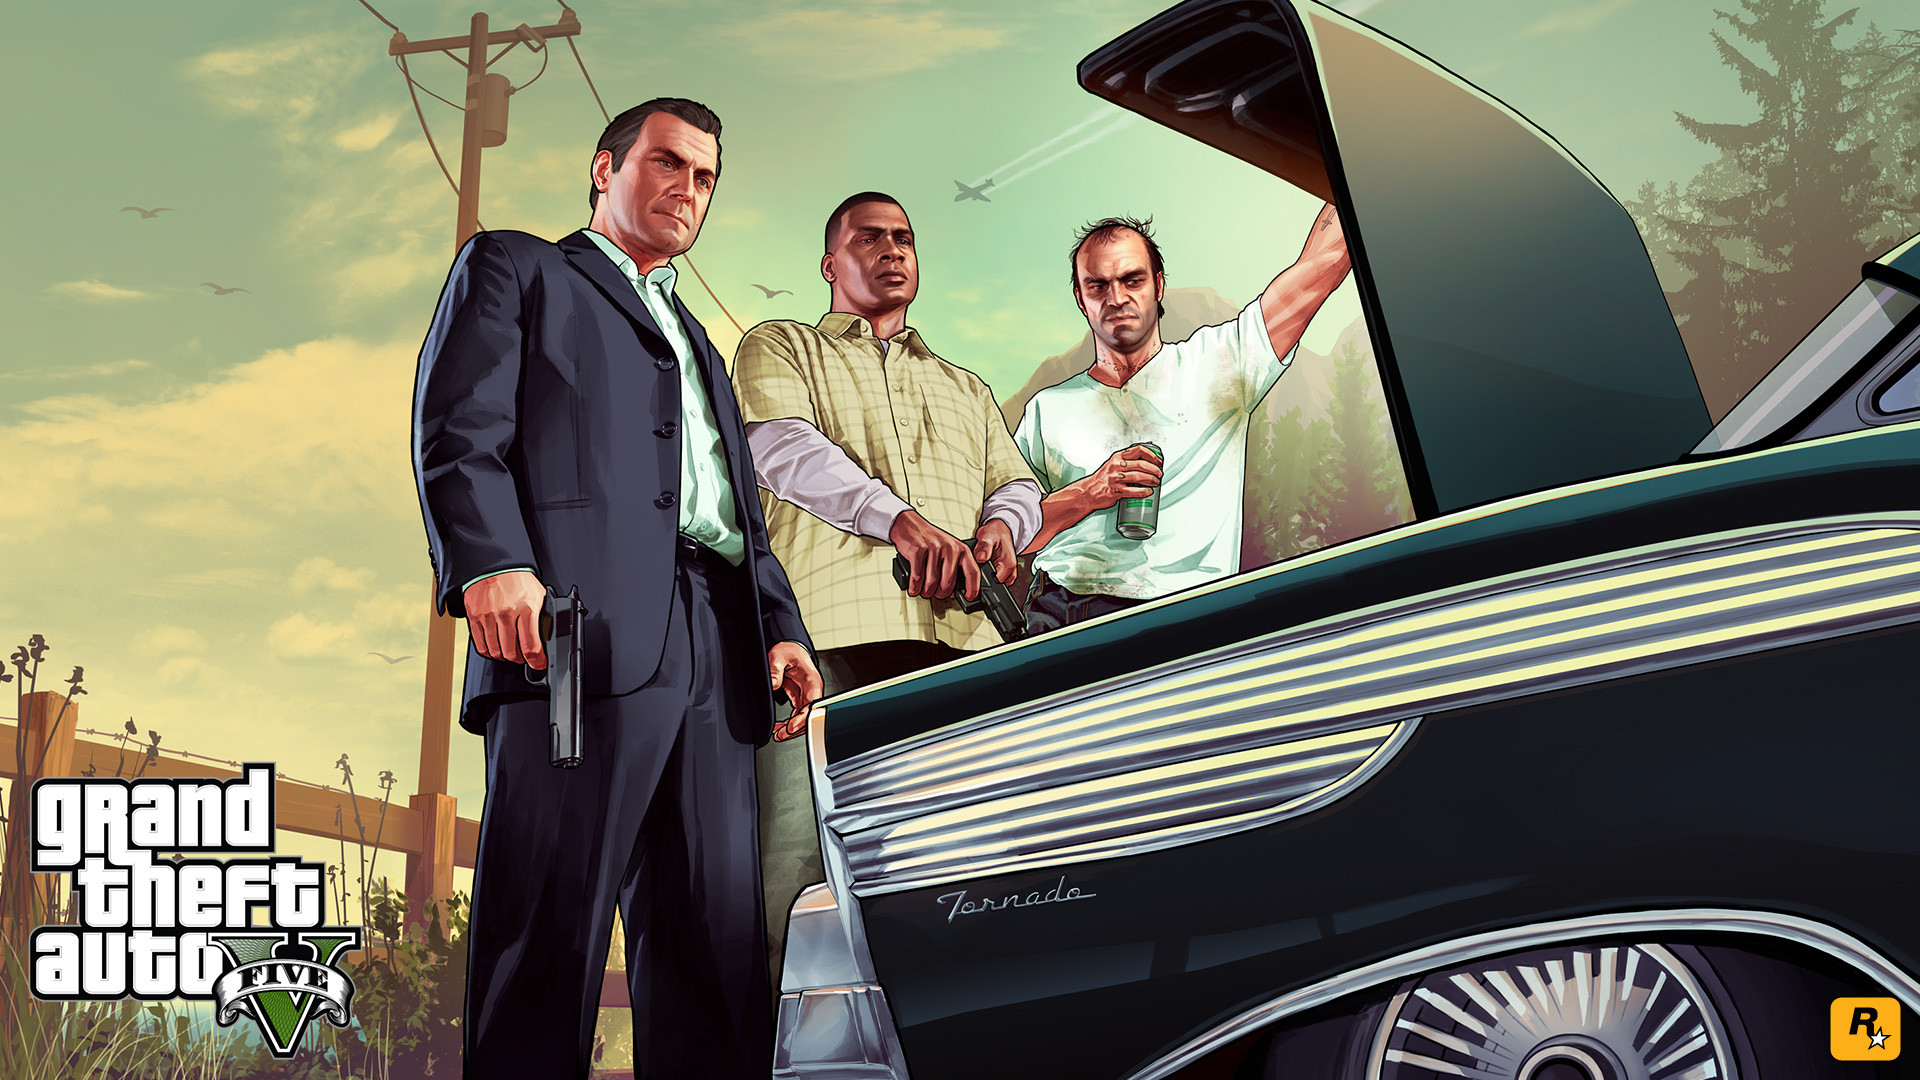 GTA V 1080p Wallpapers Released Urban Decay 1920x1080